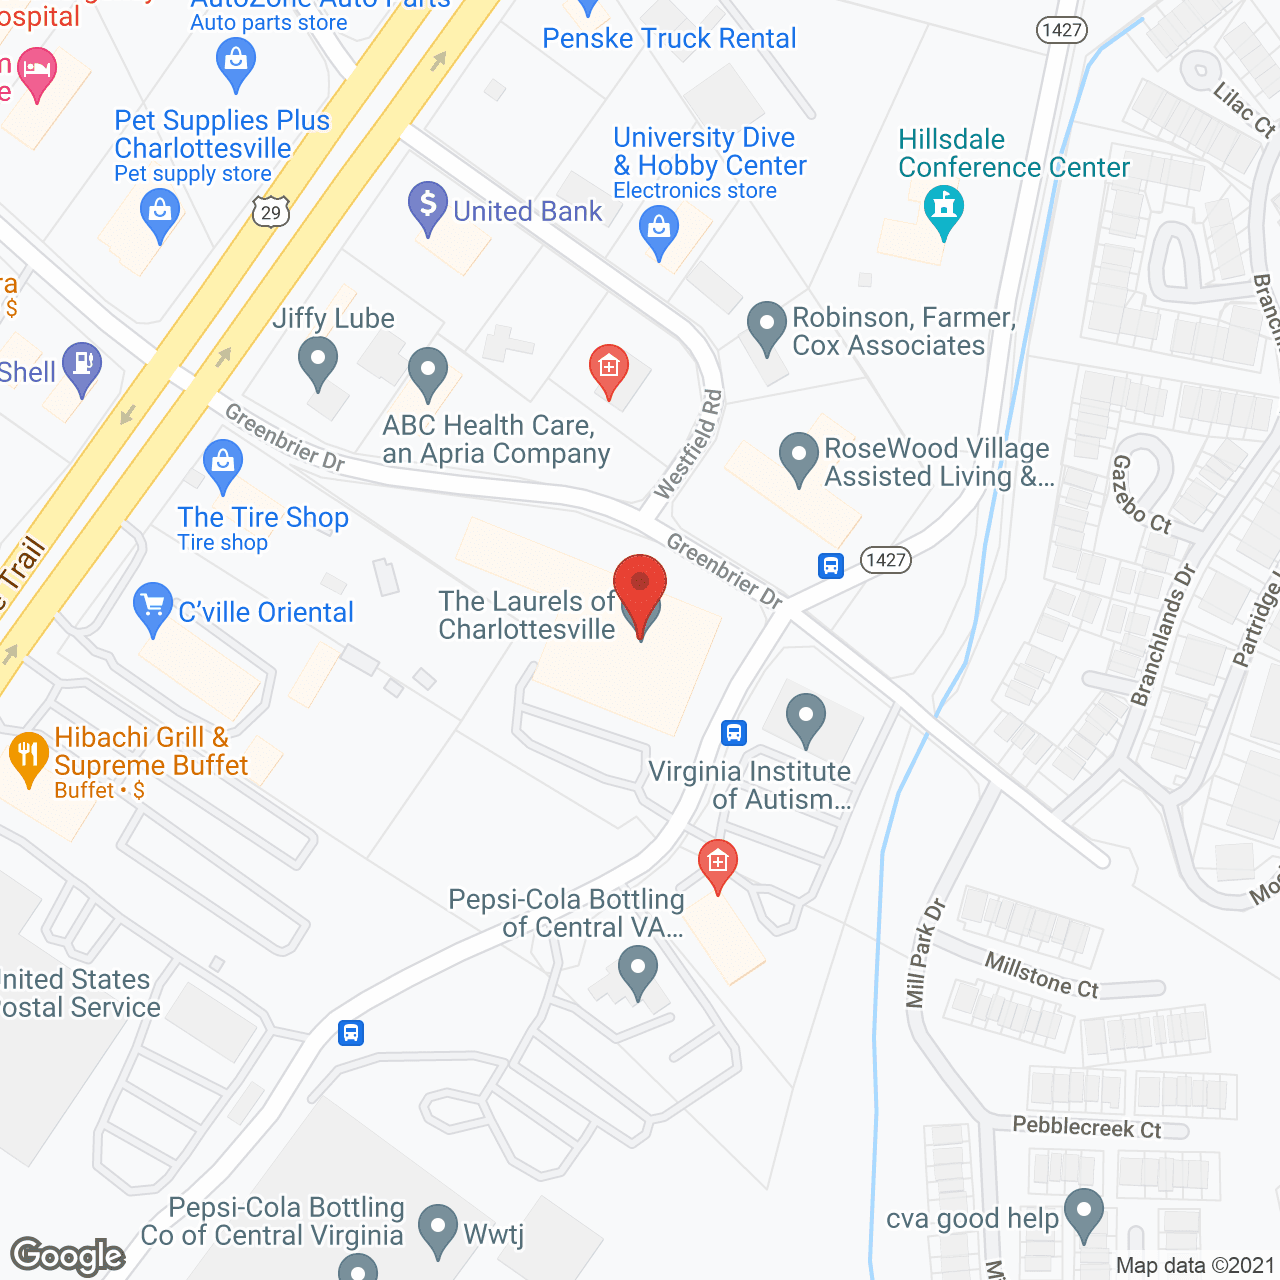 The Laurels Of Charlottesville in google map